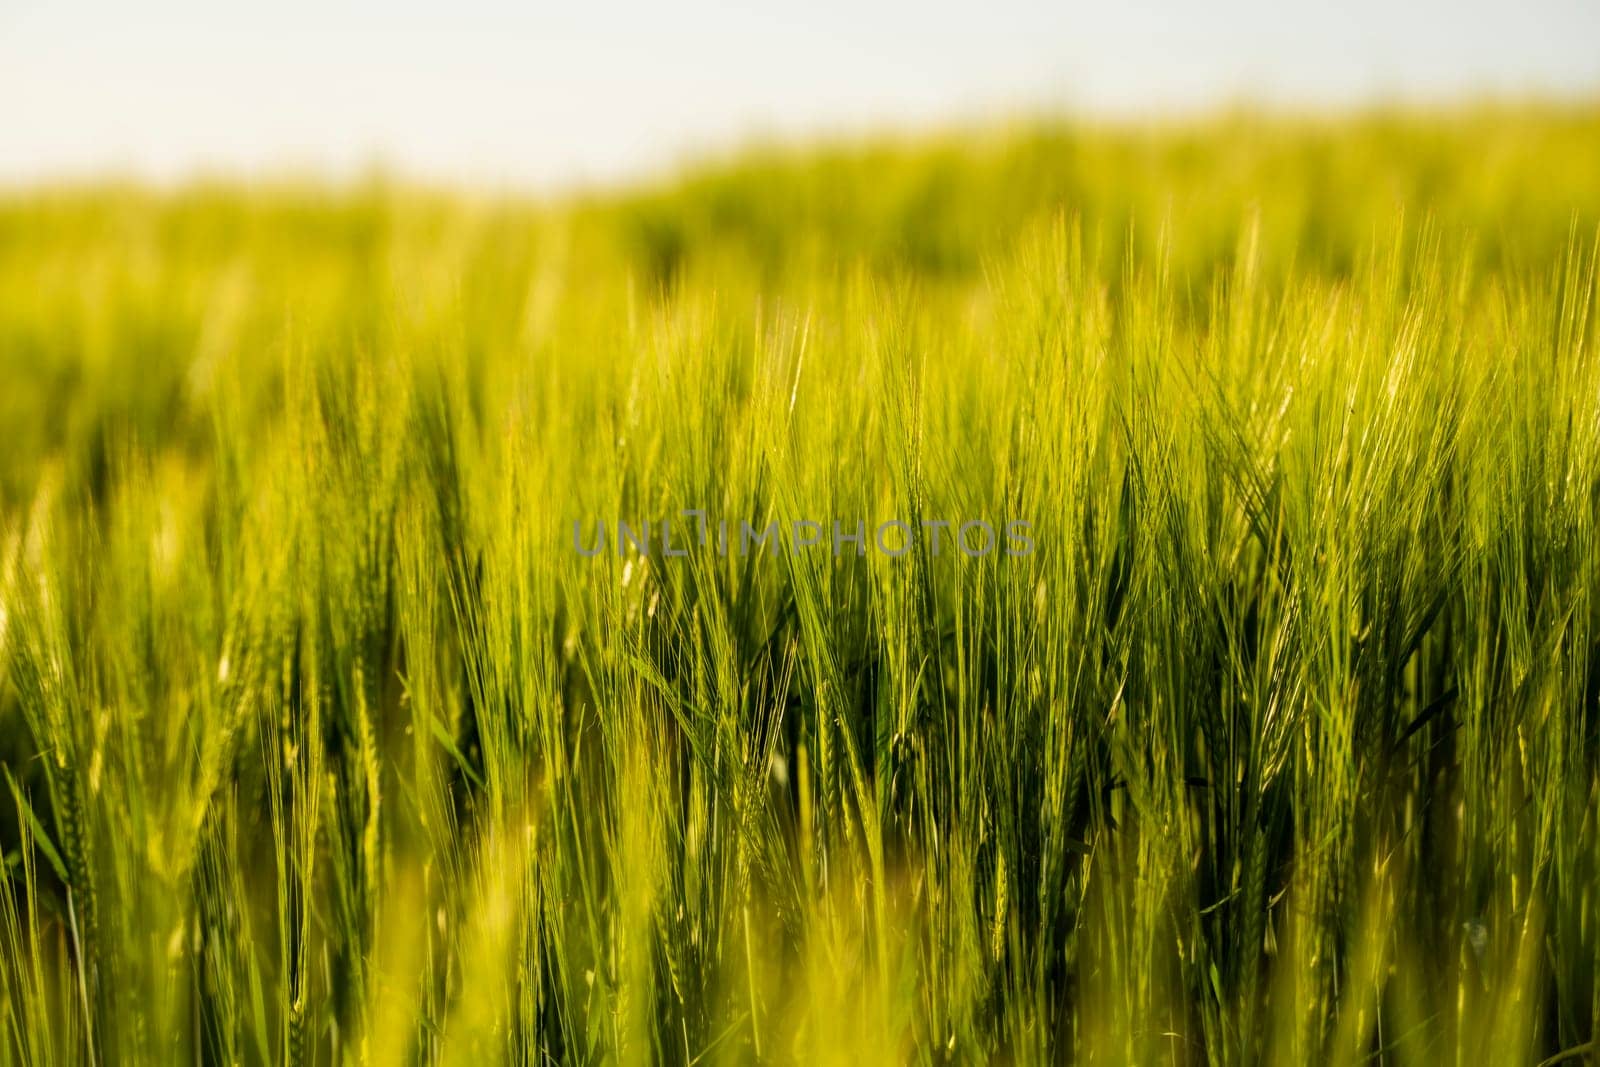 Close up green barley field under sunlight in summer. Agriculture. Cereals growing in a fertile soil